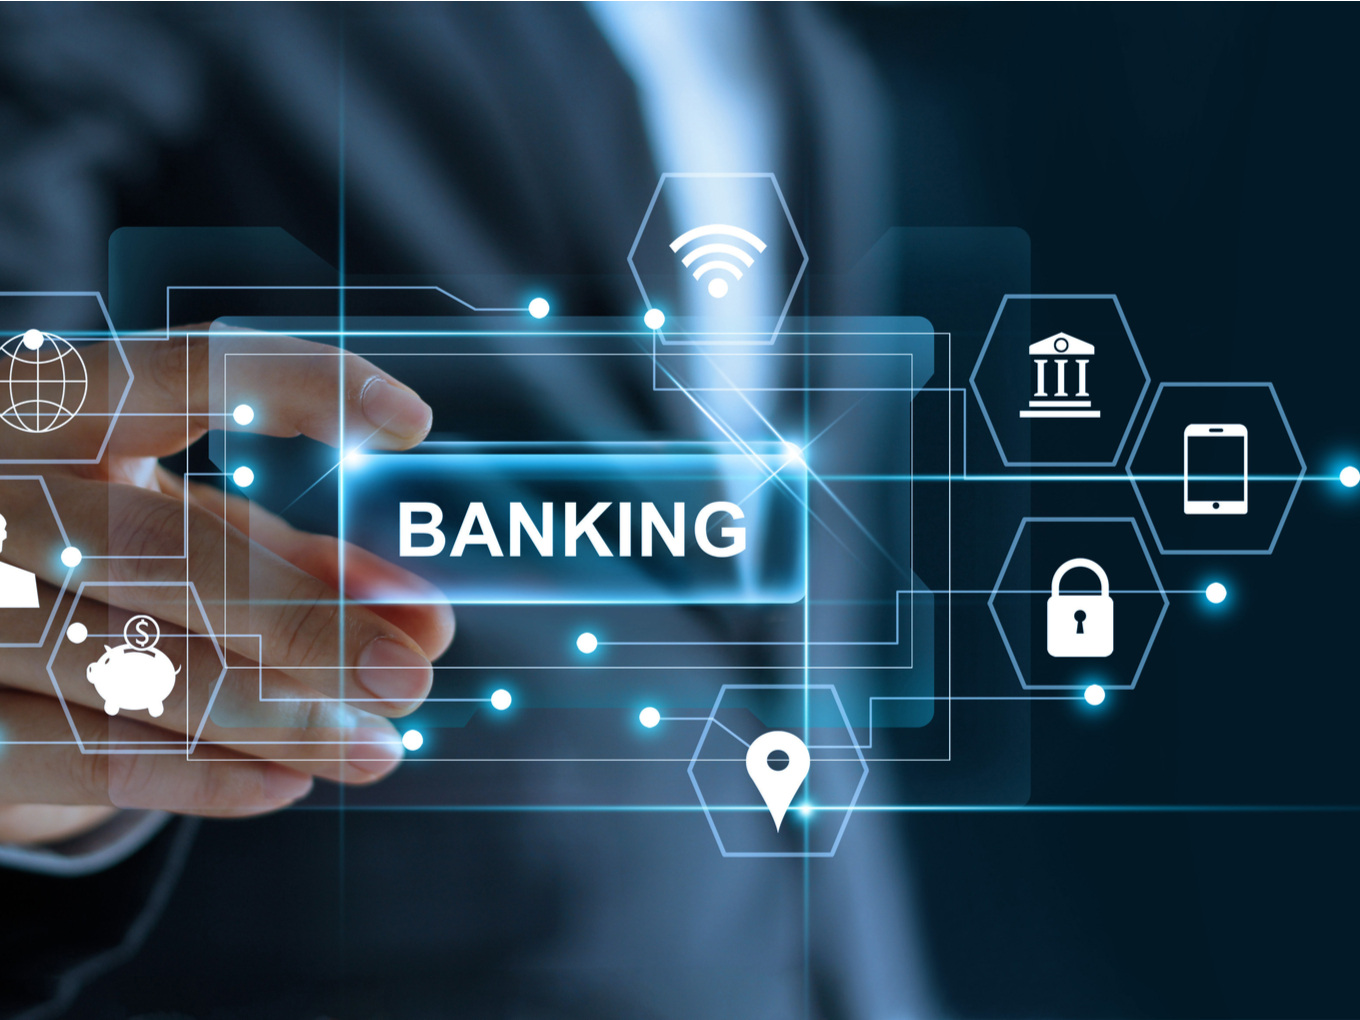 Emerging Technologies Are Fuelling a Data-Driven Banking Future